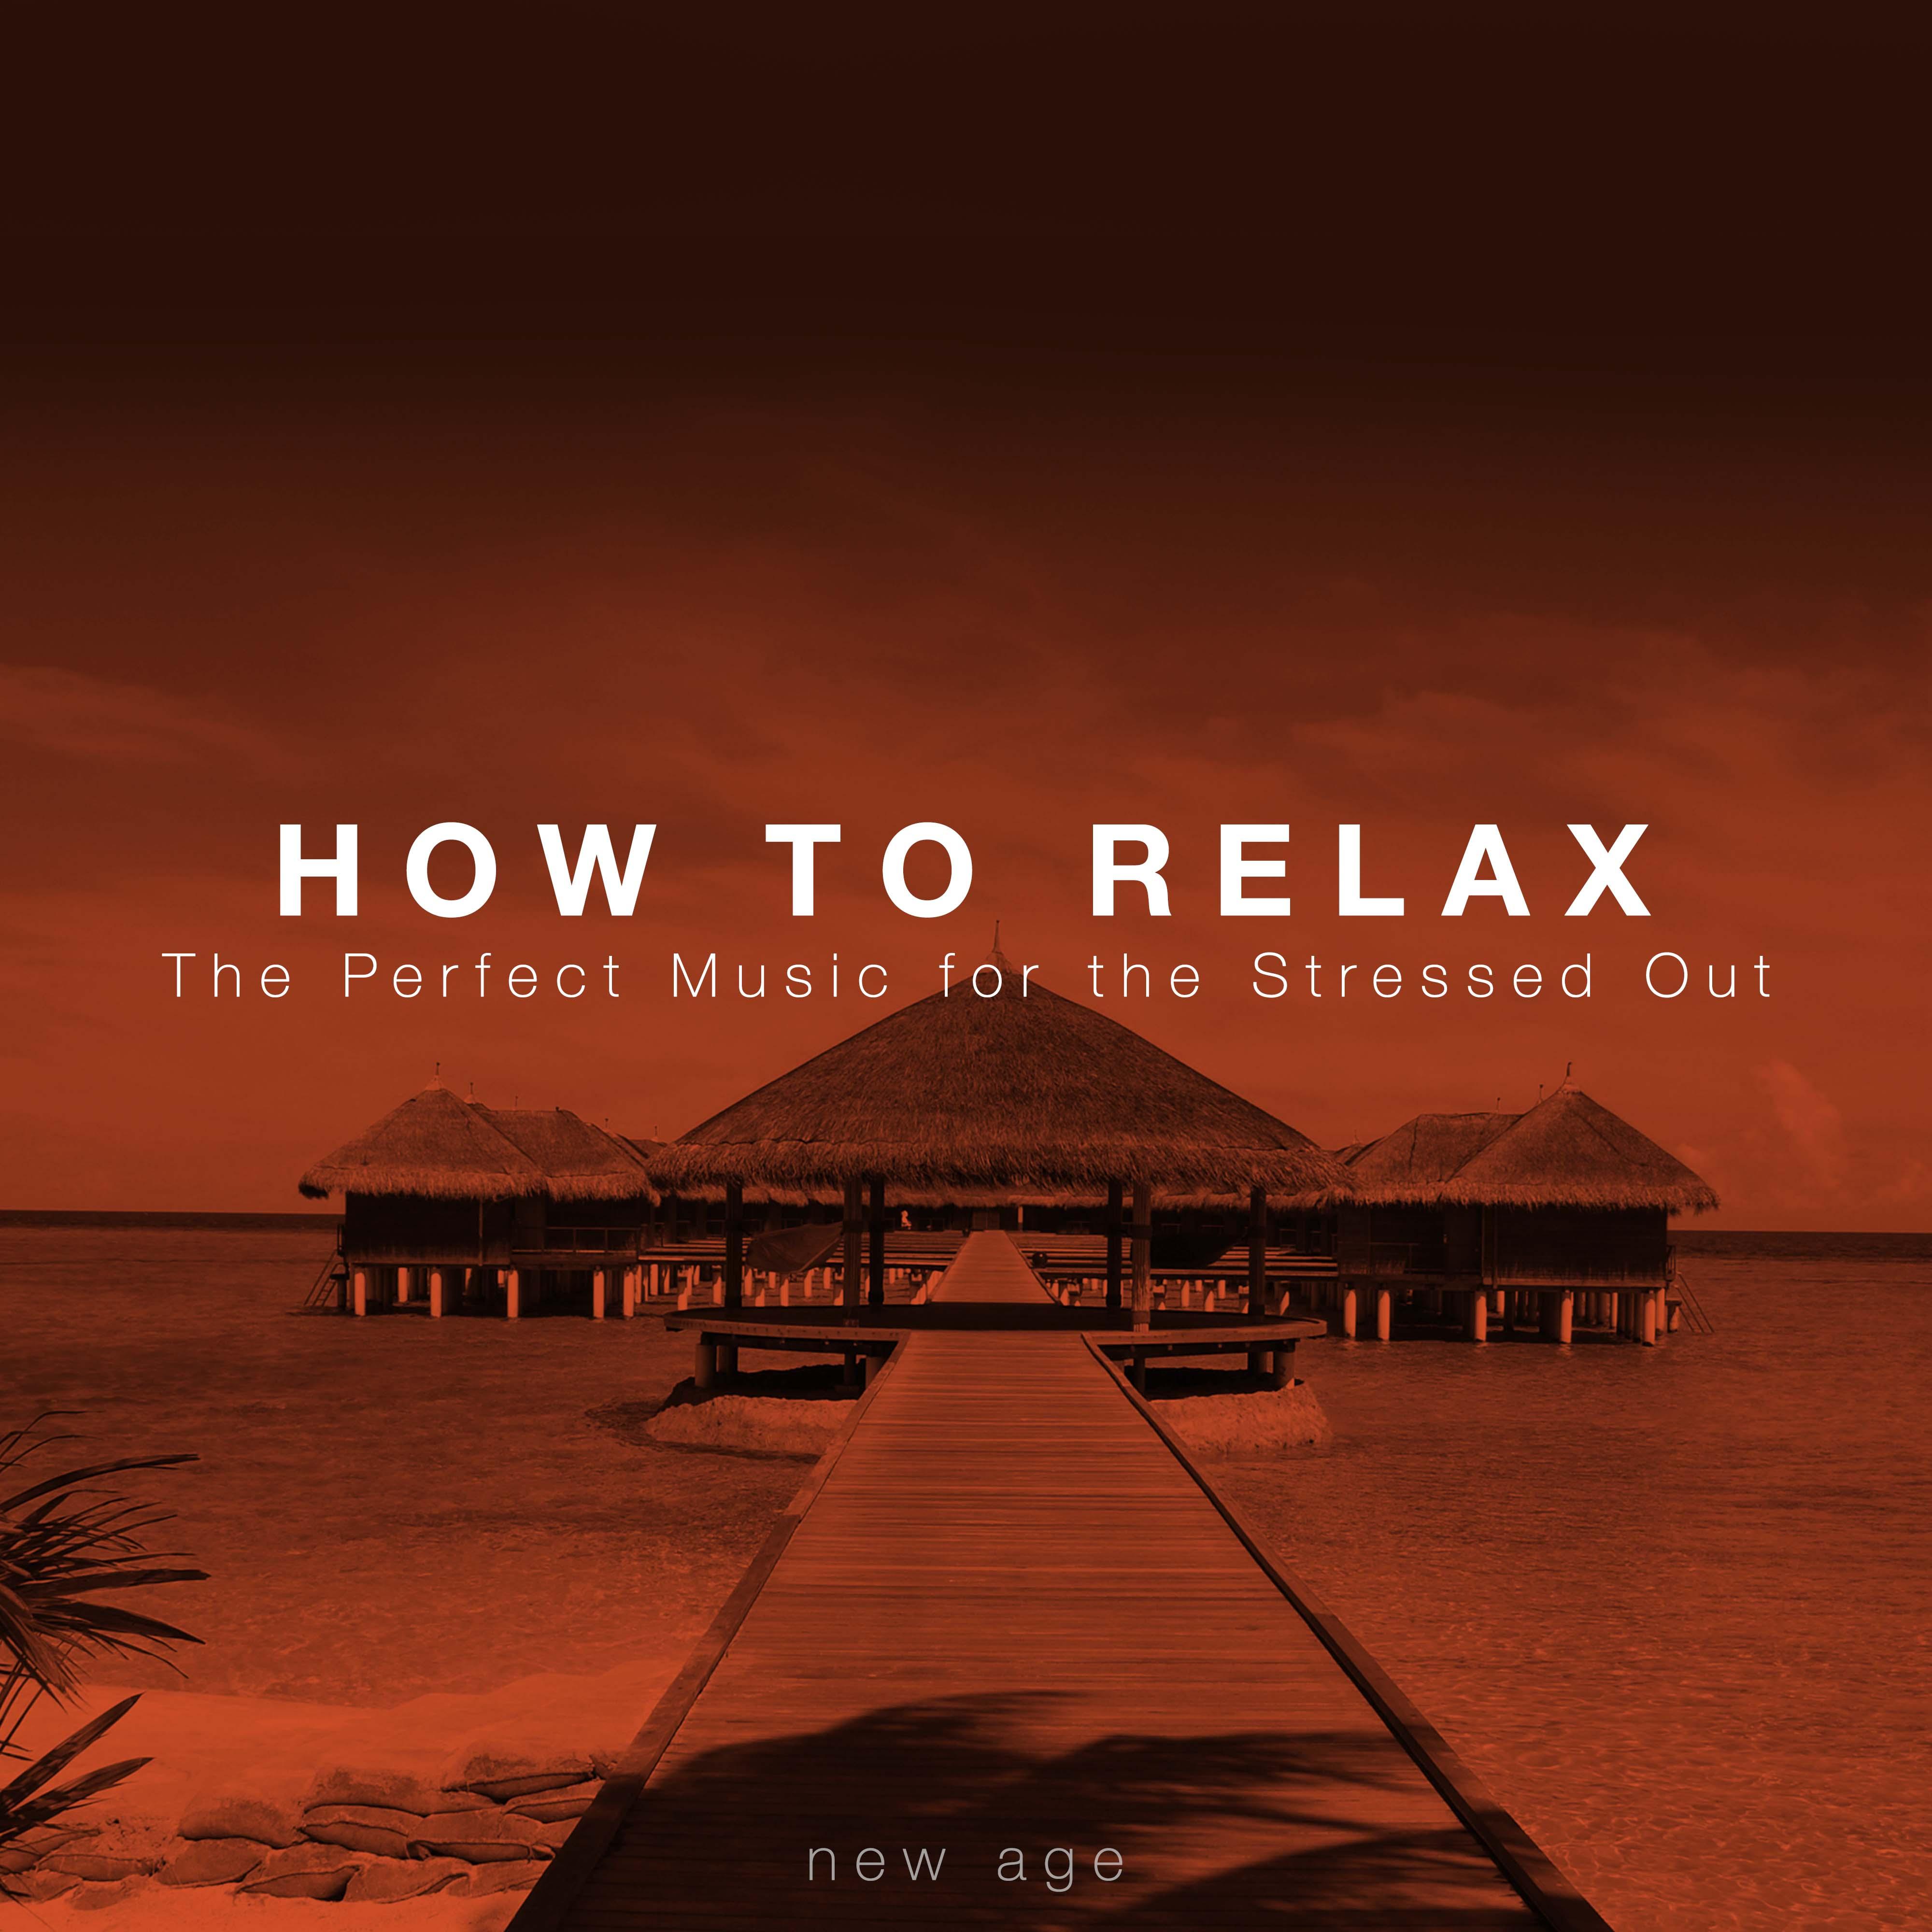 How to Relax: The Perfect Music for the Stressed Out